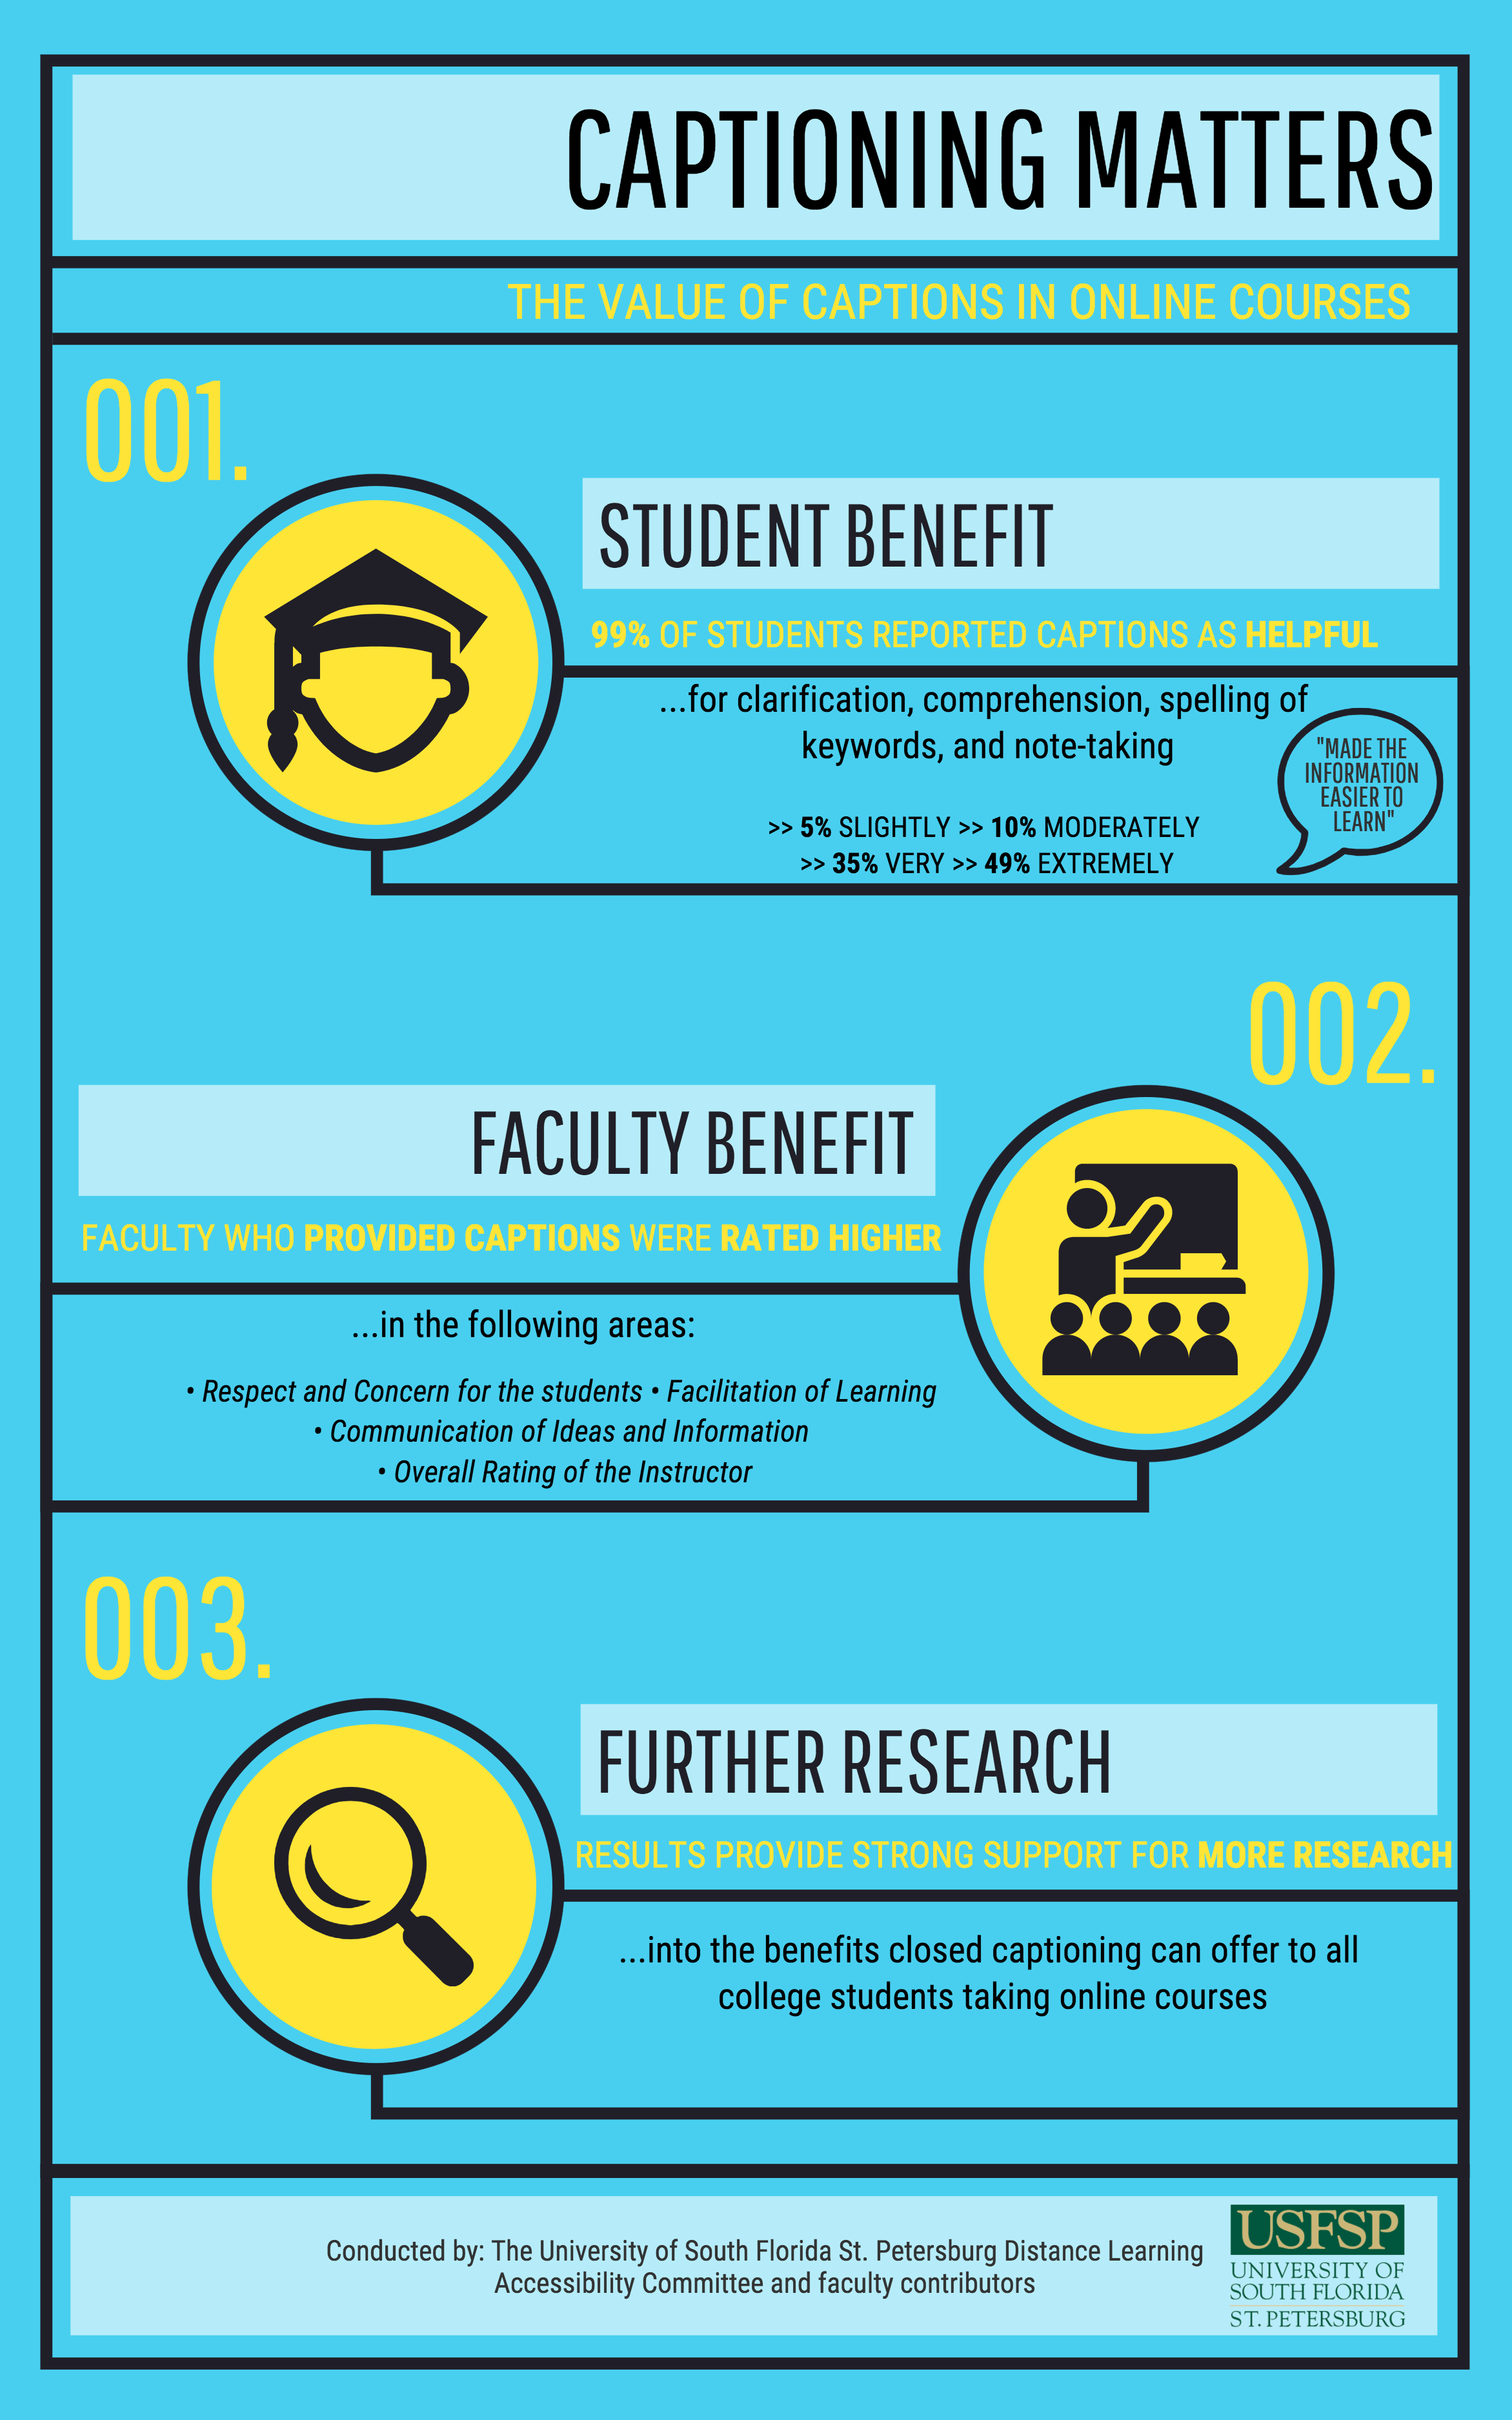 Captioning Matters: The Value of Captions in Online Courses Infographic. 1. Student Benefit: 99% of students reported captions as helpful for clarification, comprehension, spelling of keywords, and note-taking. 5% Slightly, 10% Moderately, 35% Very, and 49% Extremely. 2. Faculty Benefit. Faculty Who Provided Captions Were Rated Higher in the following areas: Respect and concern for the students, facilitation of learning, communication of ideas and information, and overall rating of the instructor. 3. Further Research. Results provide strong support for more research into the benefits closed captioning can offer to all college students taking online courses. Conducted by the University of South Florida St. Petersburg Distance Learning Accessibility Committee and faculty contributors.